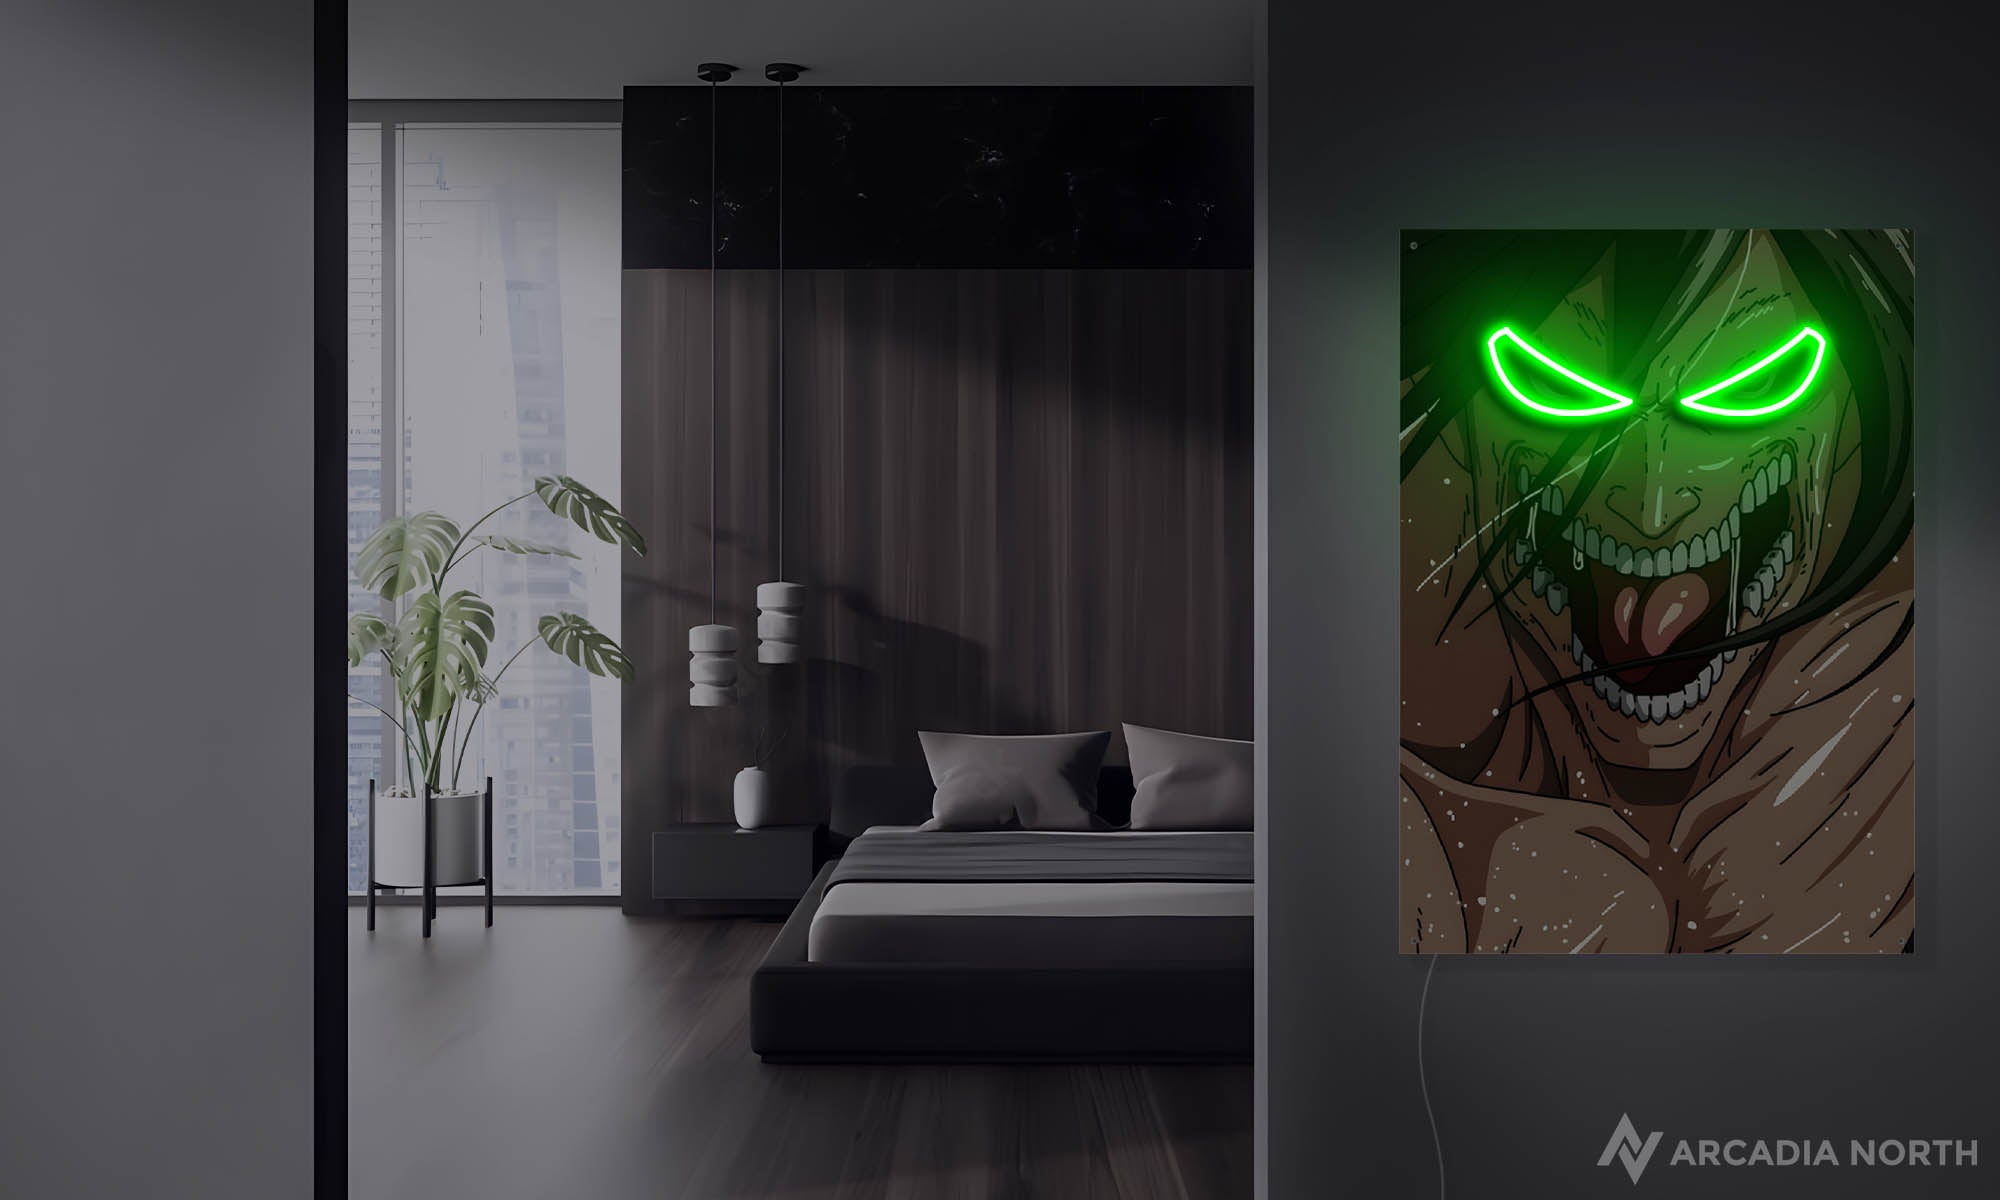 Modern bedroom with an Arcadia North LED Poster based on the anime Attack on Titan depicting Eren Yeager as the Attack Titan with glowing eyes